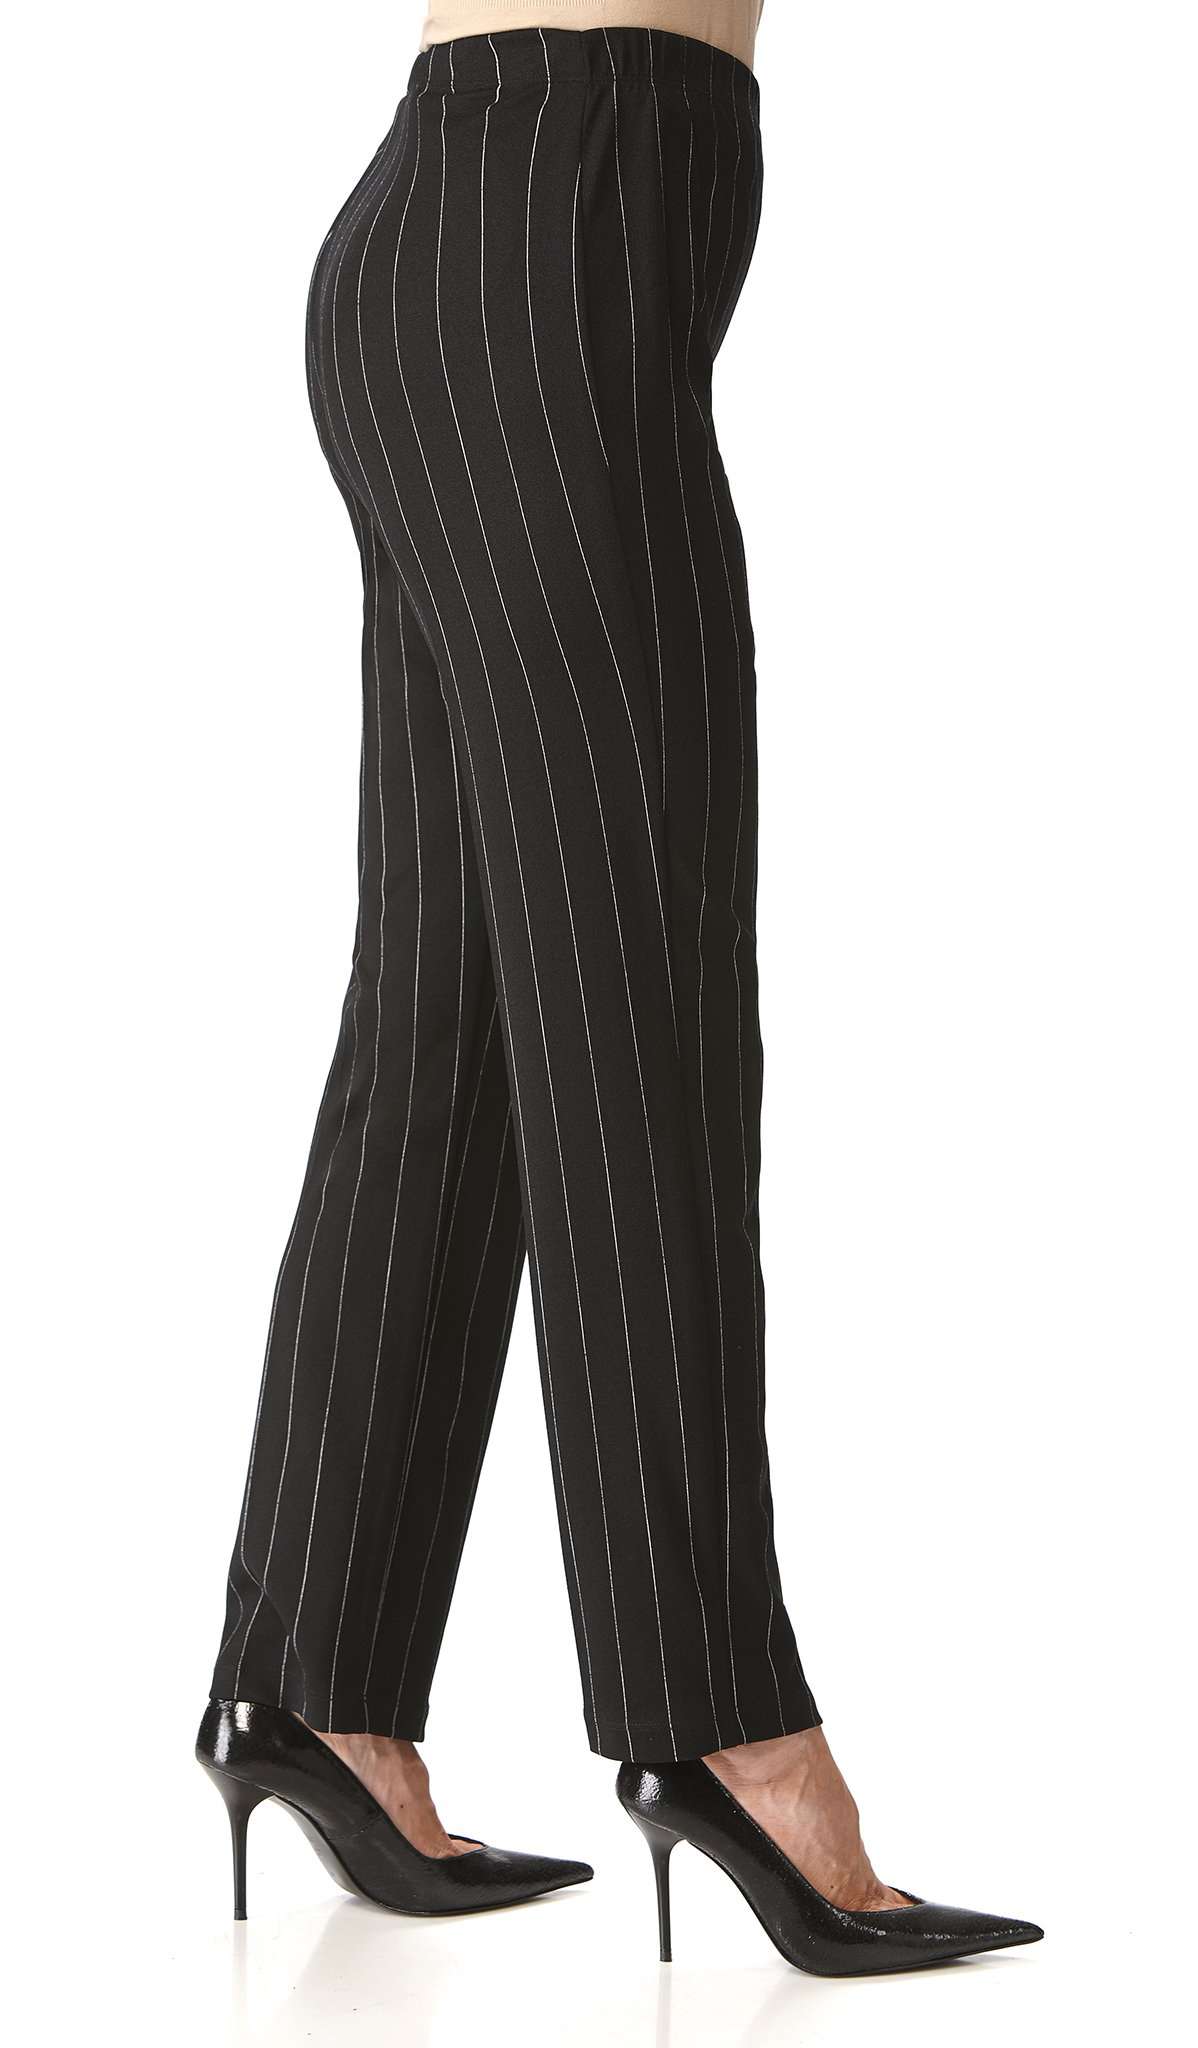 Women's Pants On Sale Black Pinstripe Quality Stretch Pant Pull On Design Made in Canada - Yvonne Marie - Yvonne Marie